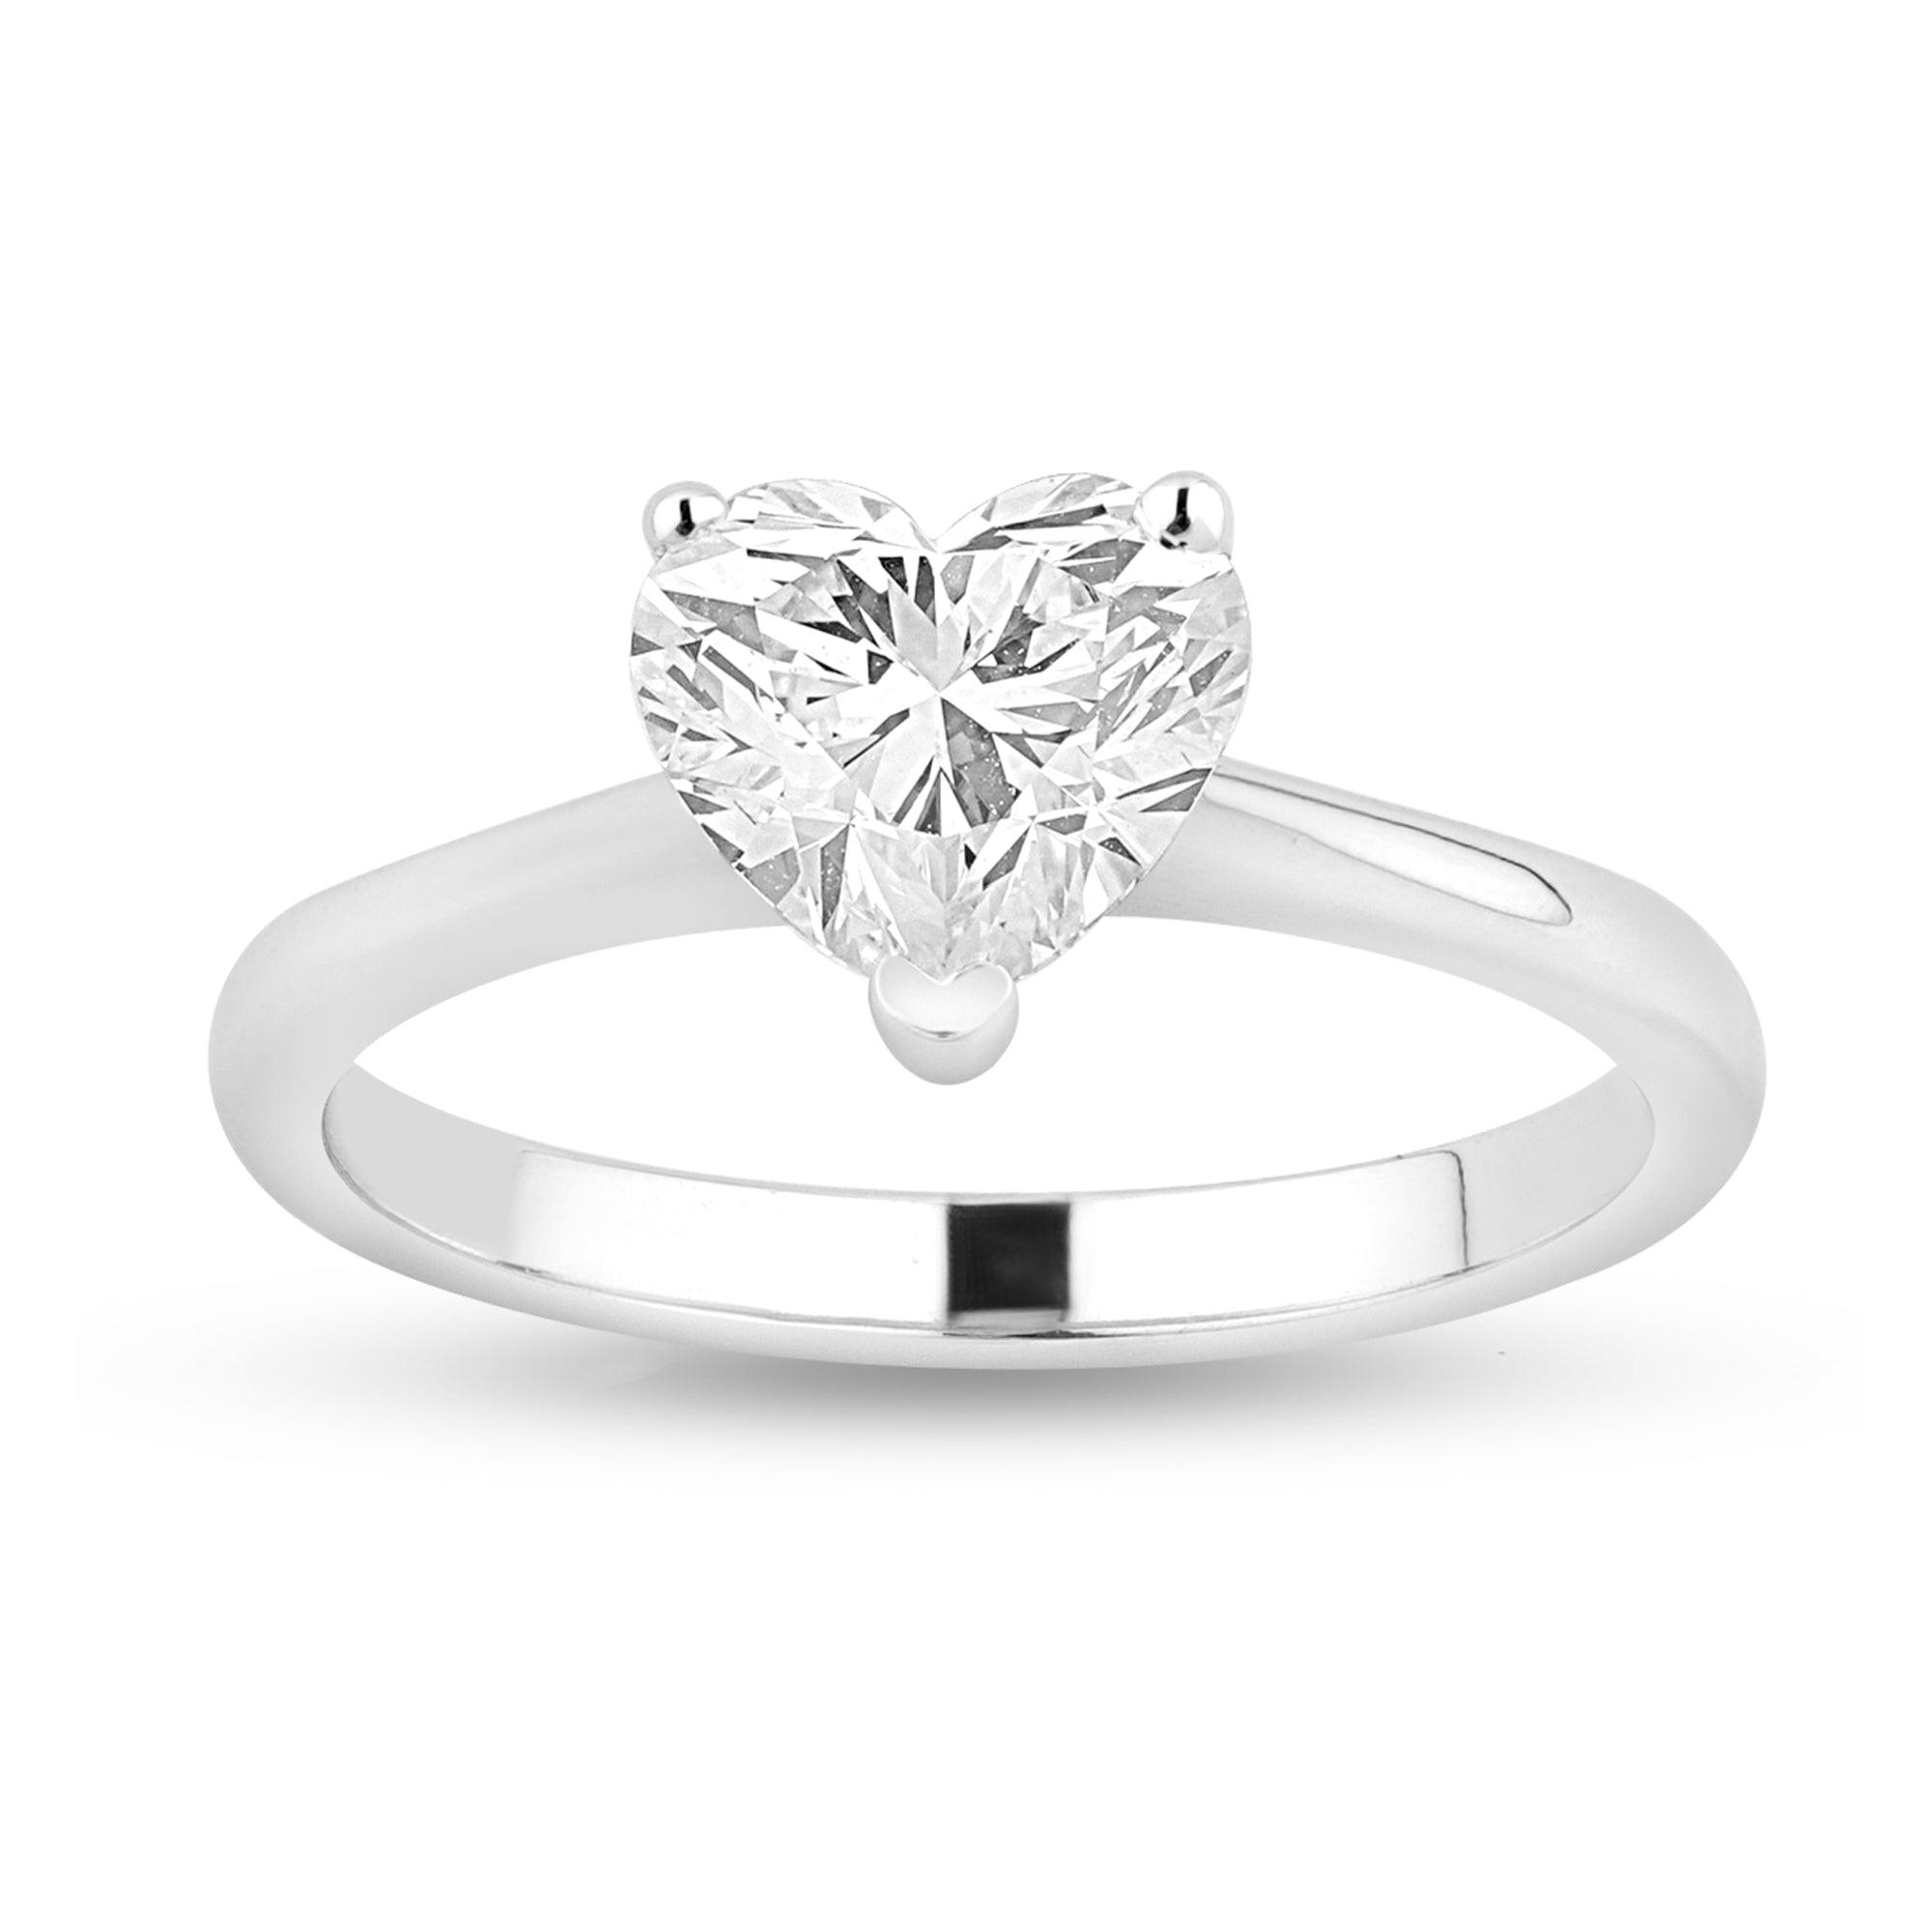 Moissanite Solitaire Ring with 1.7ct Heart Center Stone - Harmony Bound